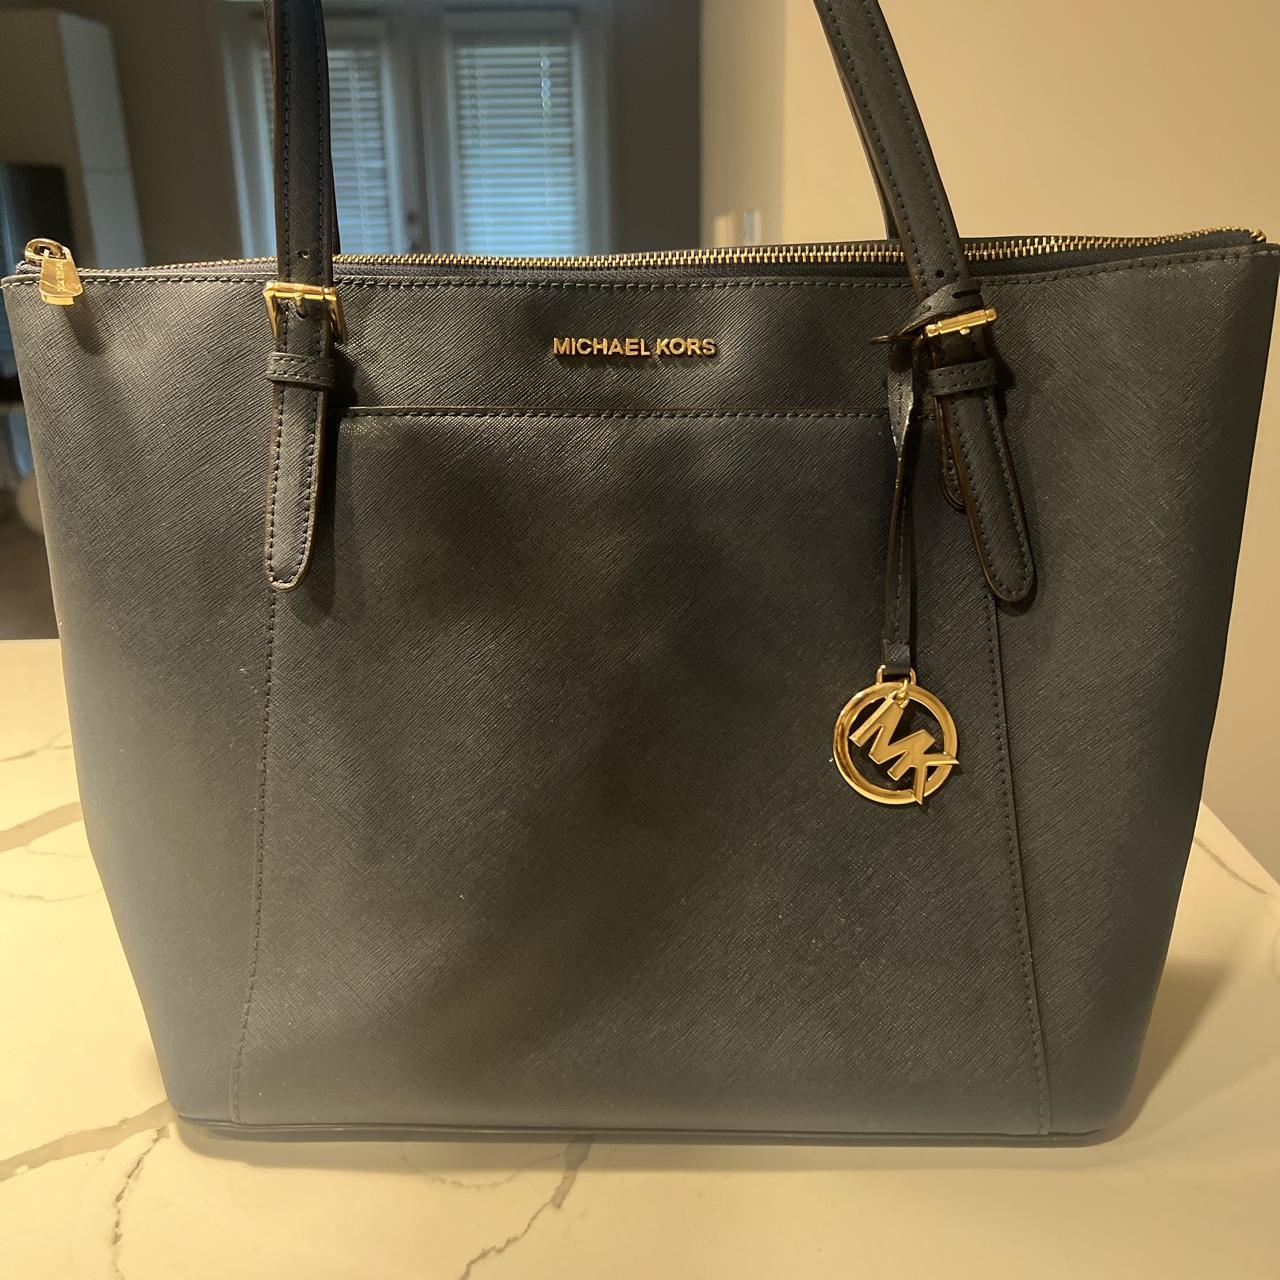 MICHAEL KORS Voyager Large Saffiano Leather Tote Bag